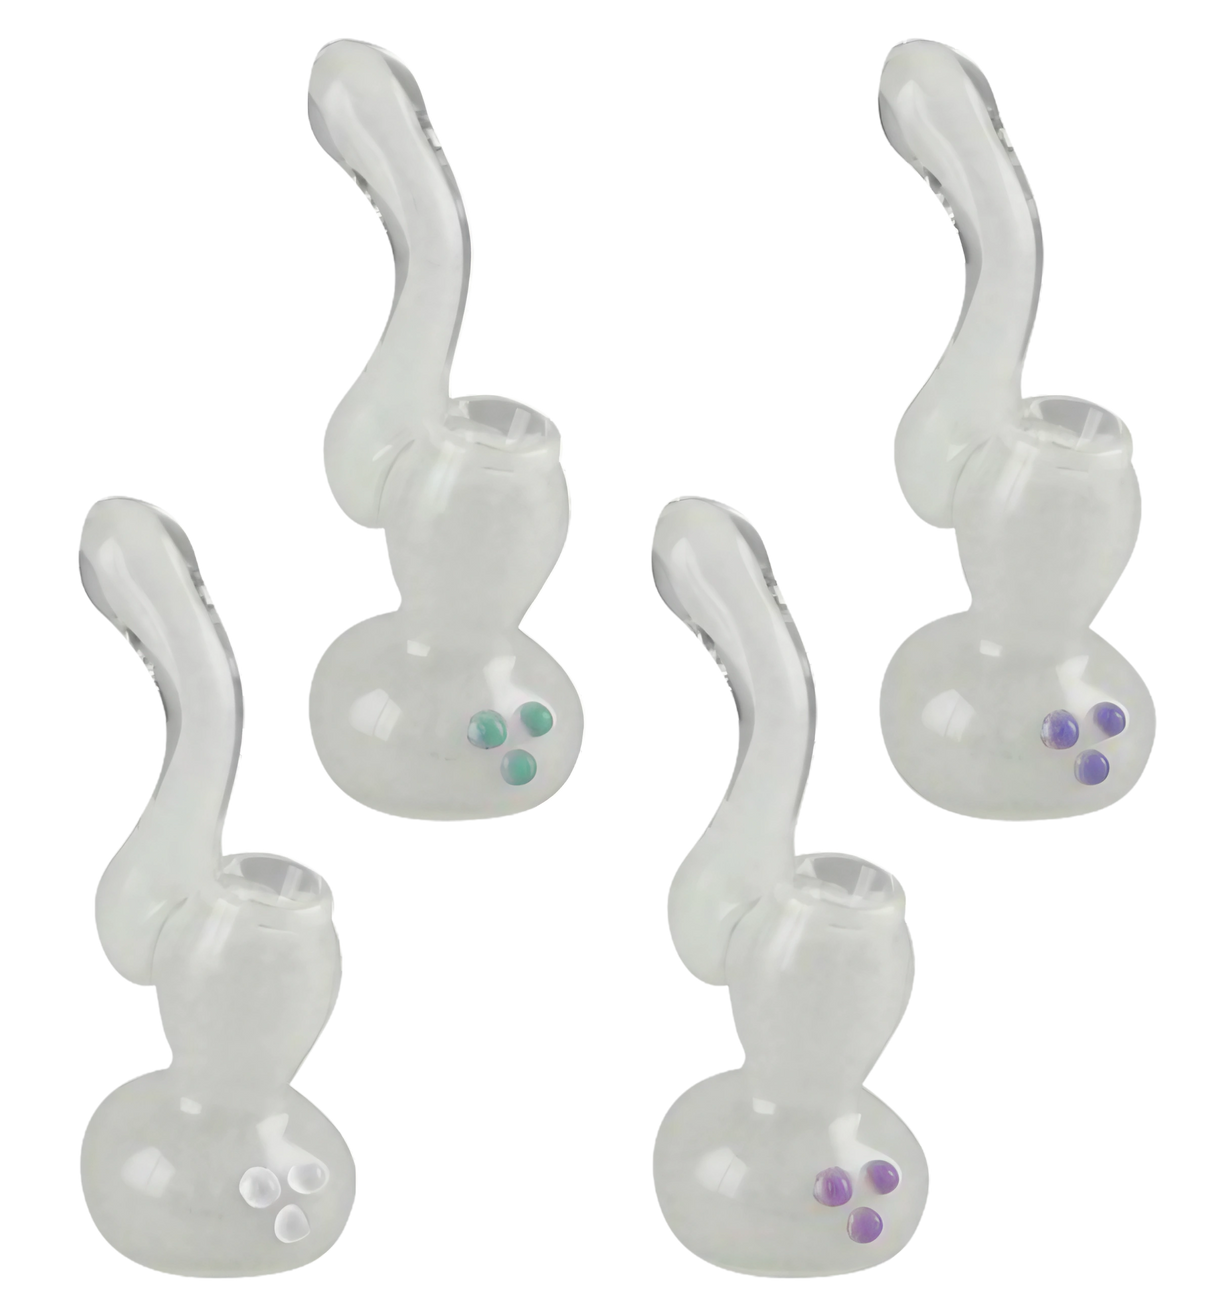 Glow in the Dark Borosilicate Glass Bubblers, 5" Height, for Dry Herbs - Front and Angle Views